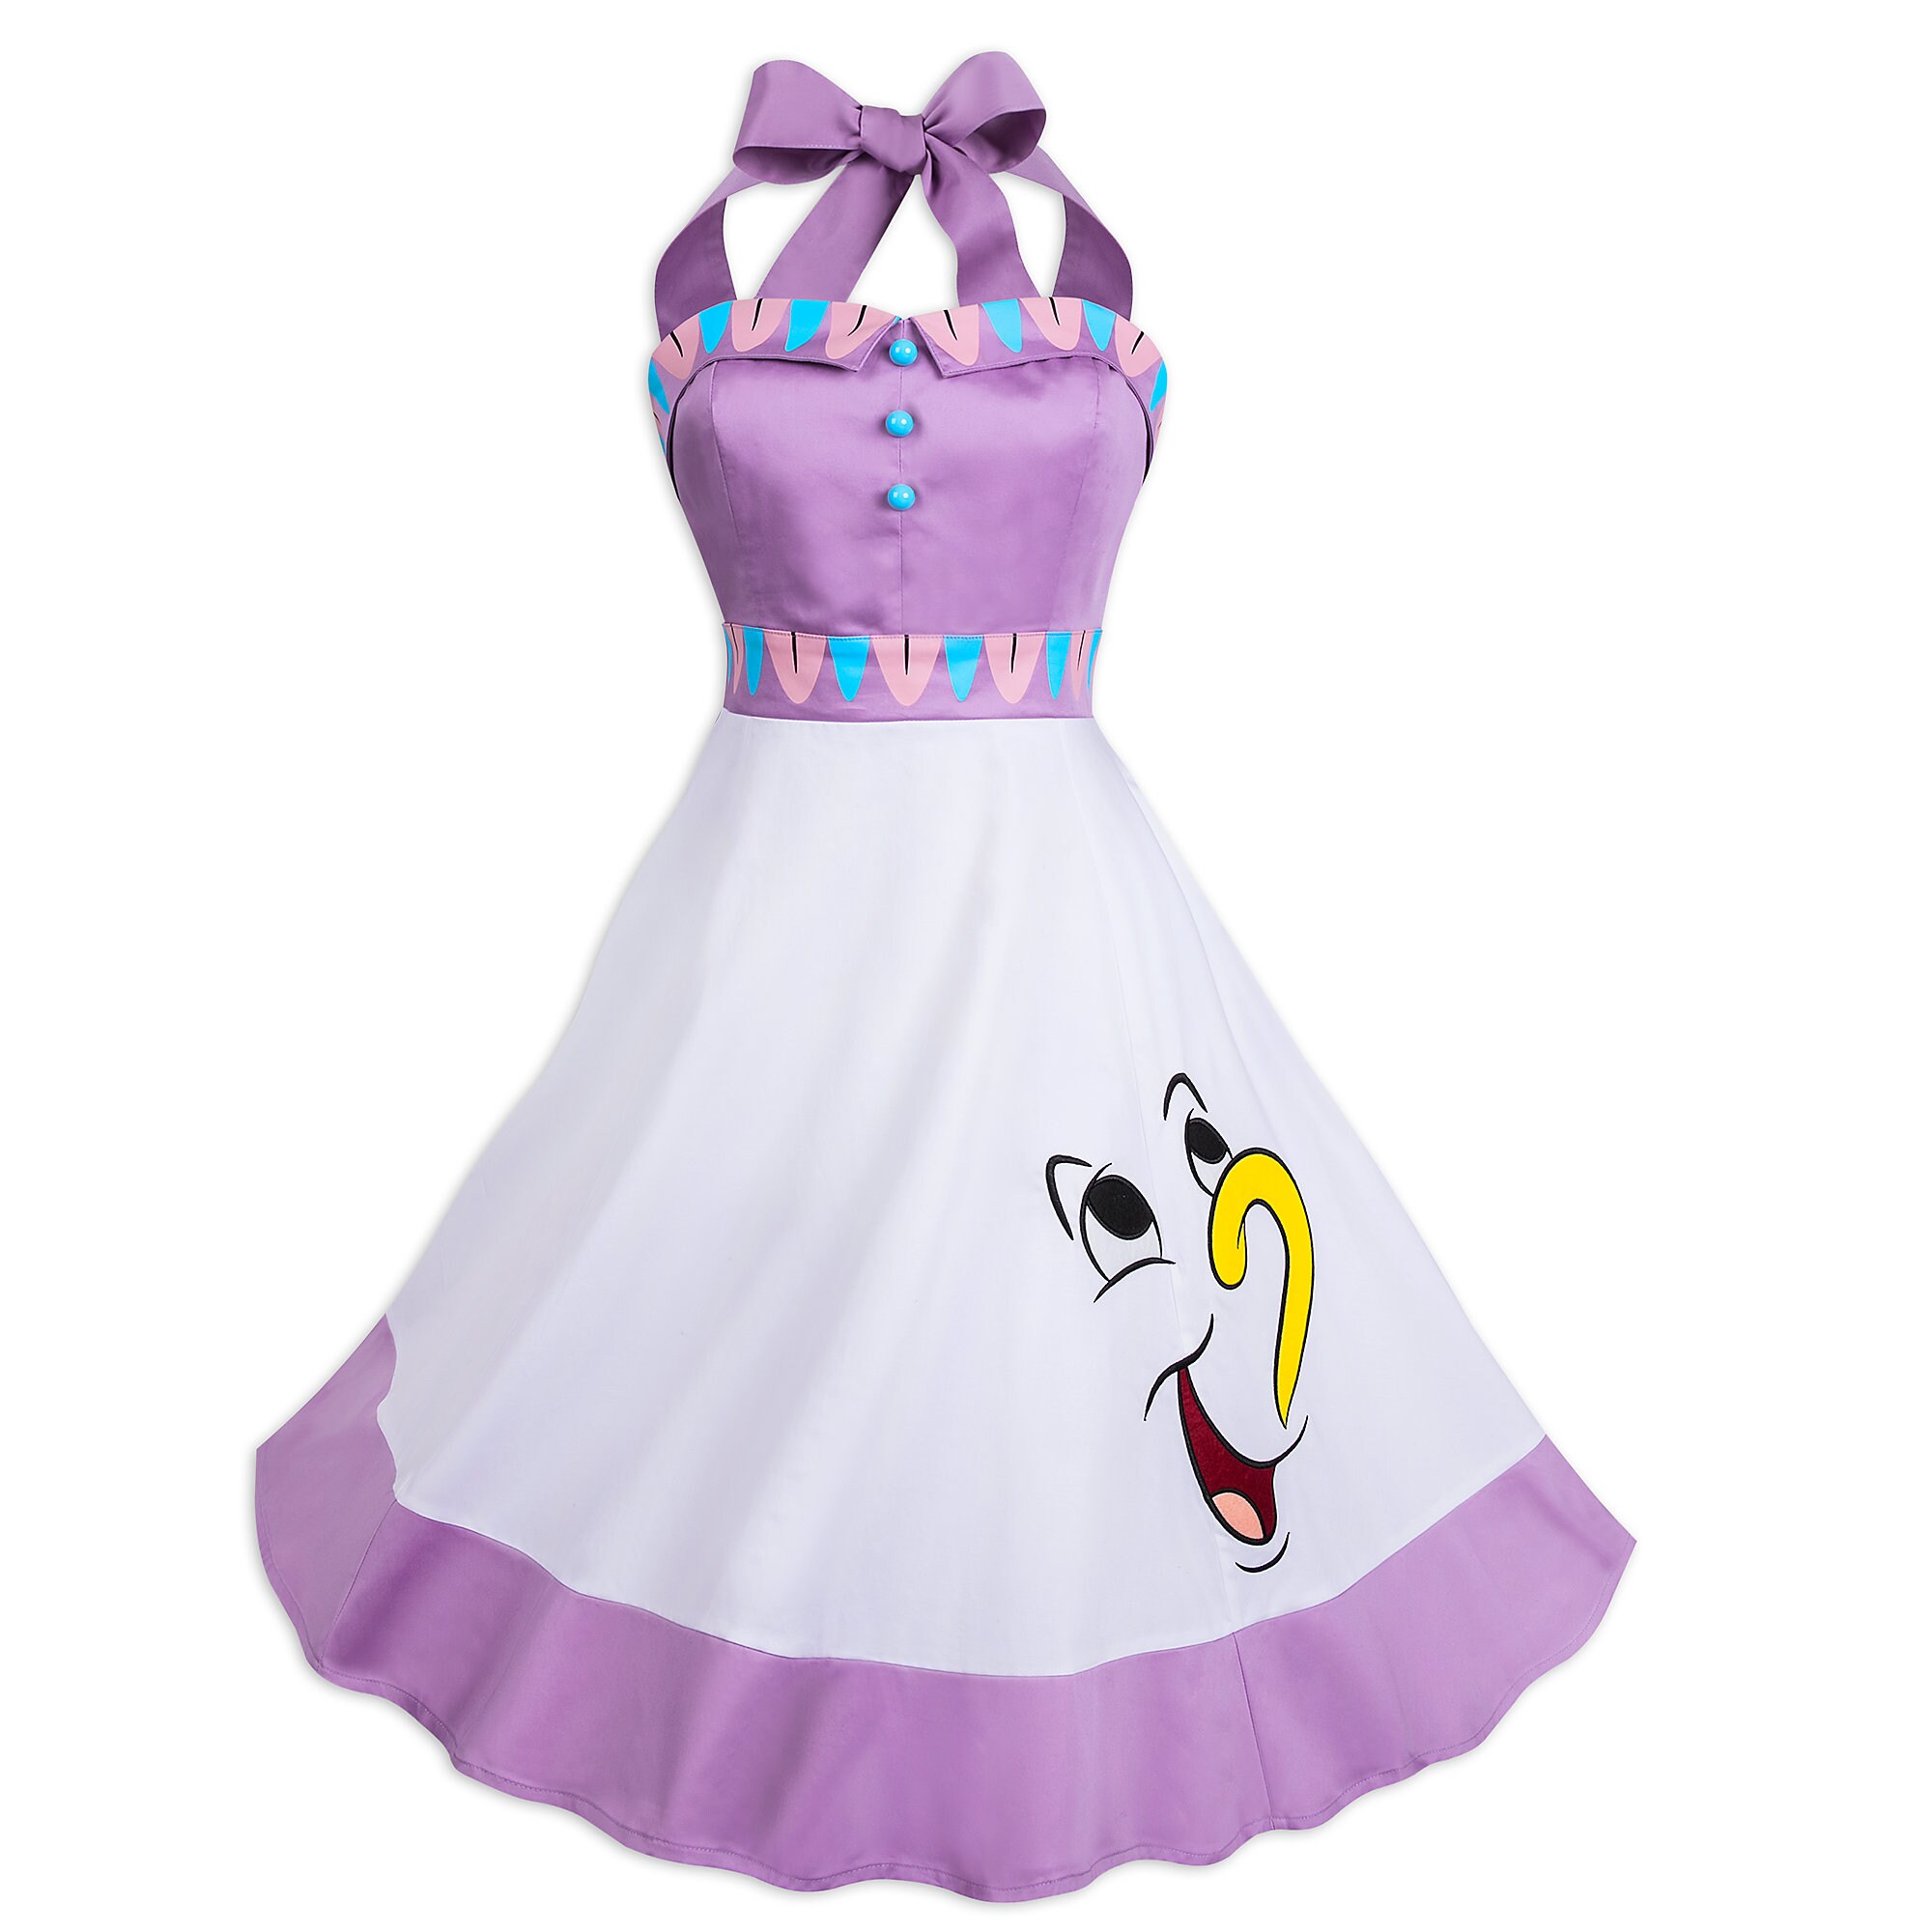 Mrs. Potts and Chip Dress for Women - Beauty and the Beast